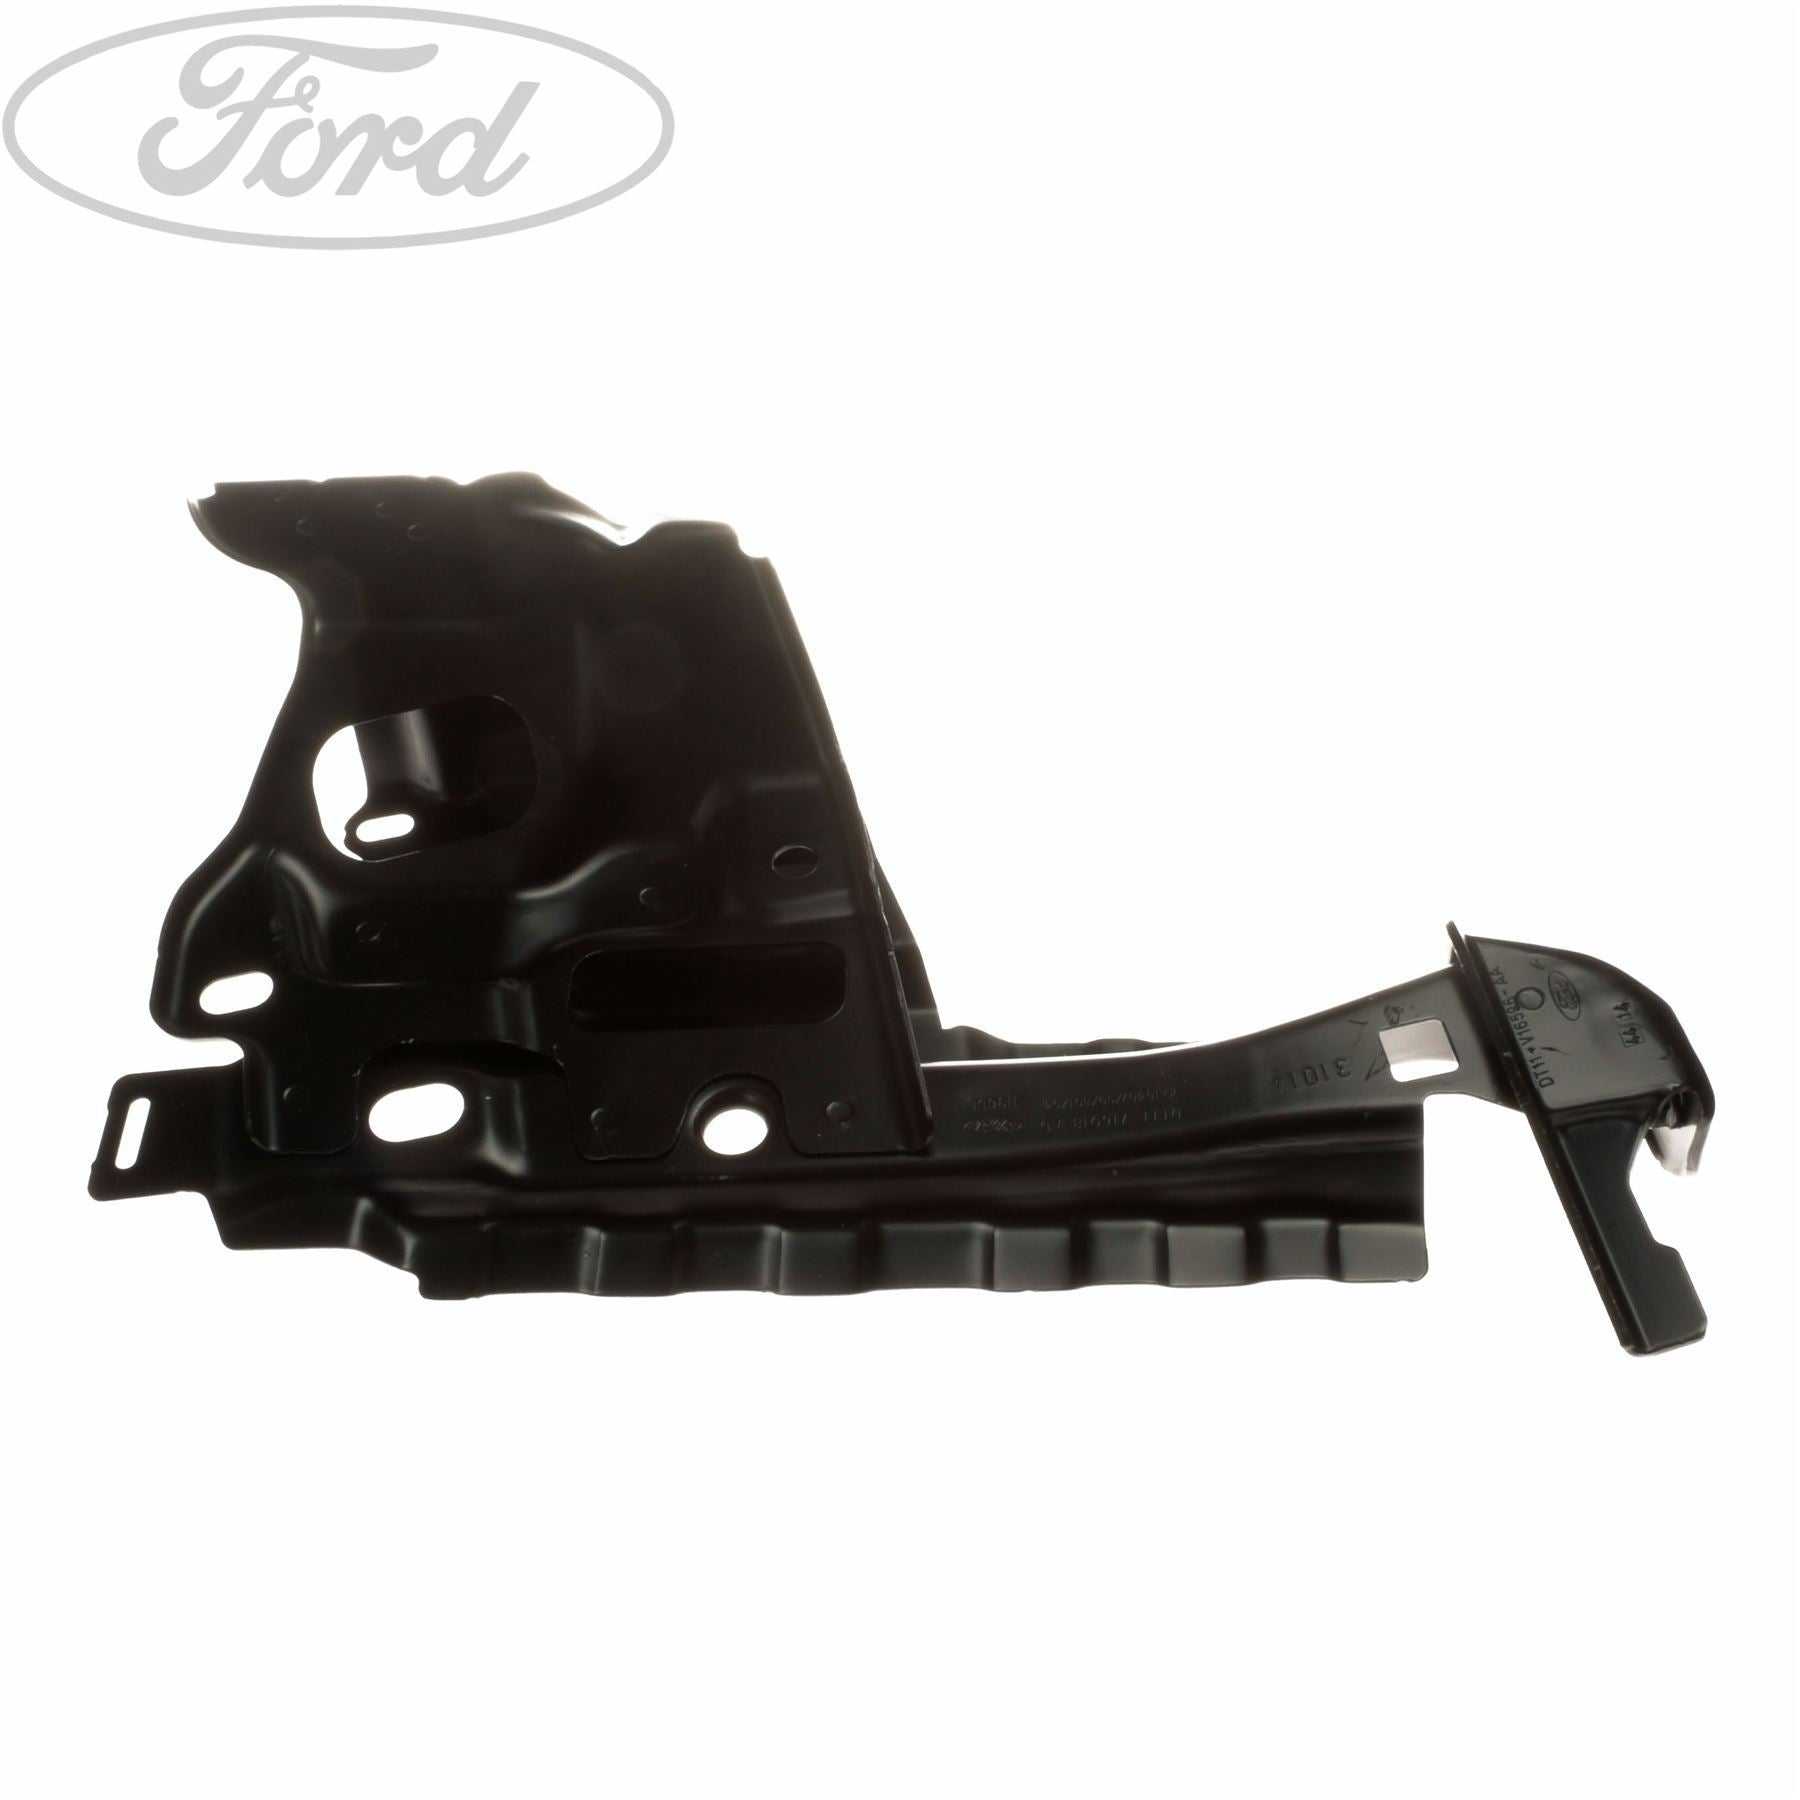 Ford, SIDE PANEL PARTS